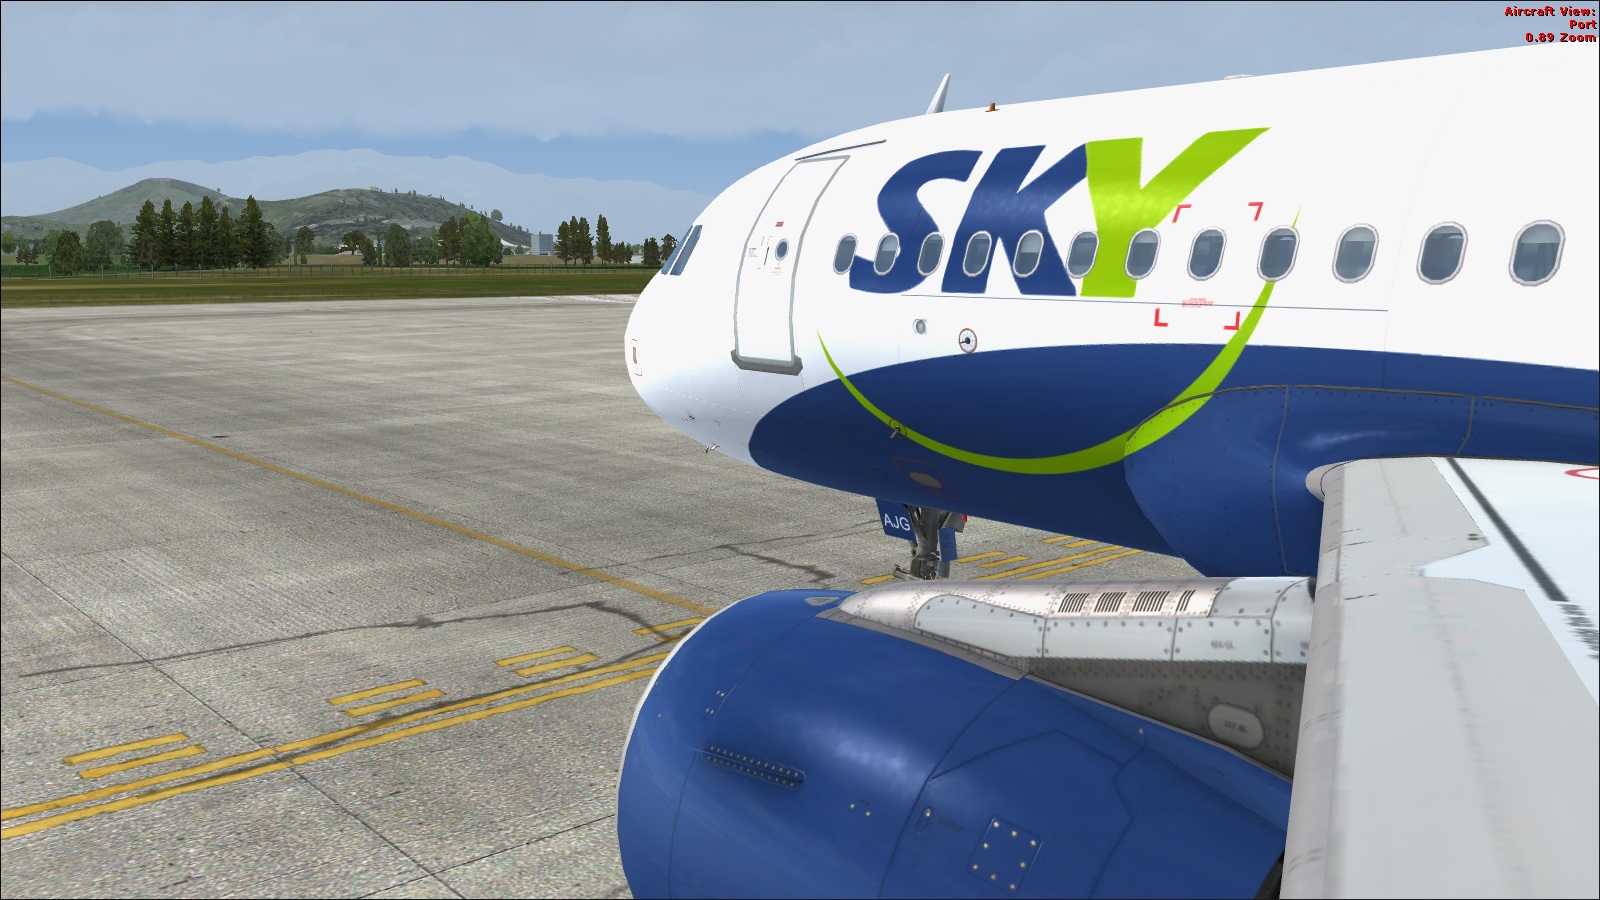 More information about "SKY Airline A319 CC-AJG"